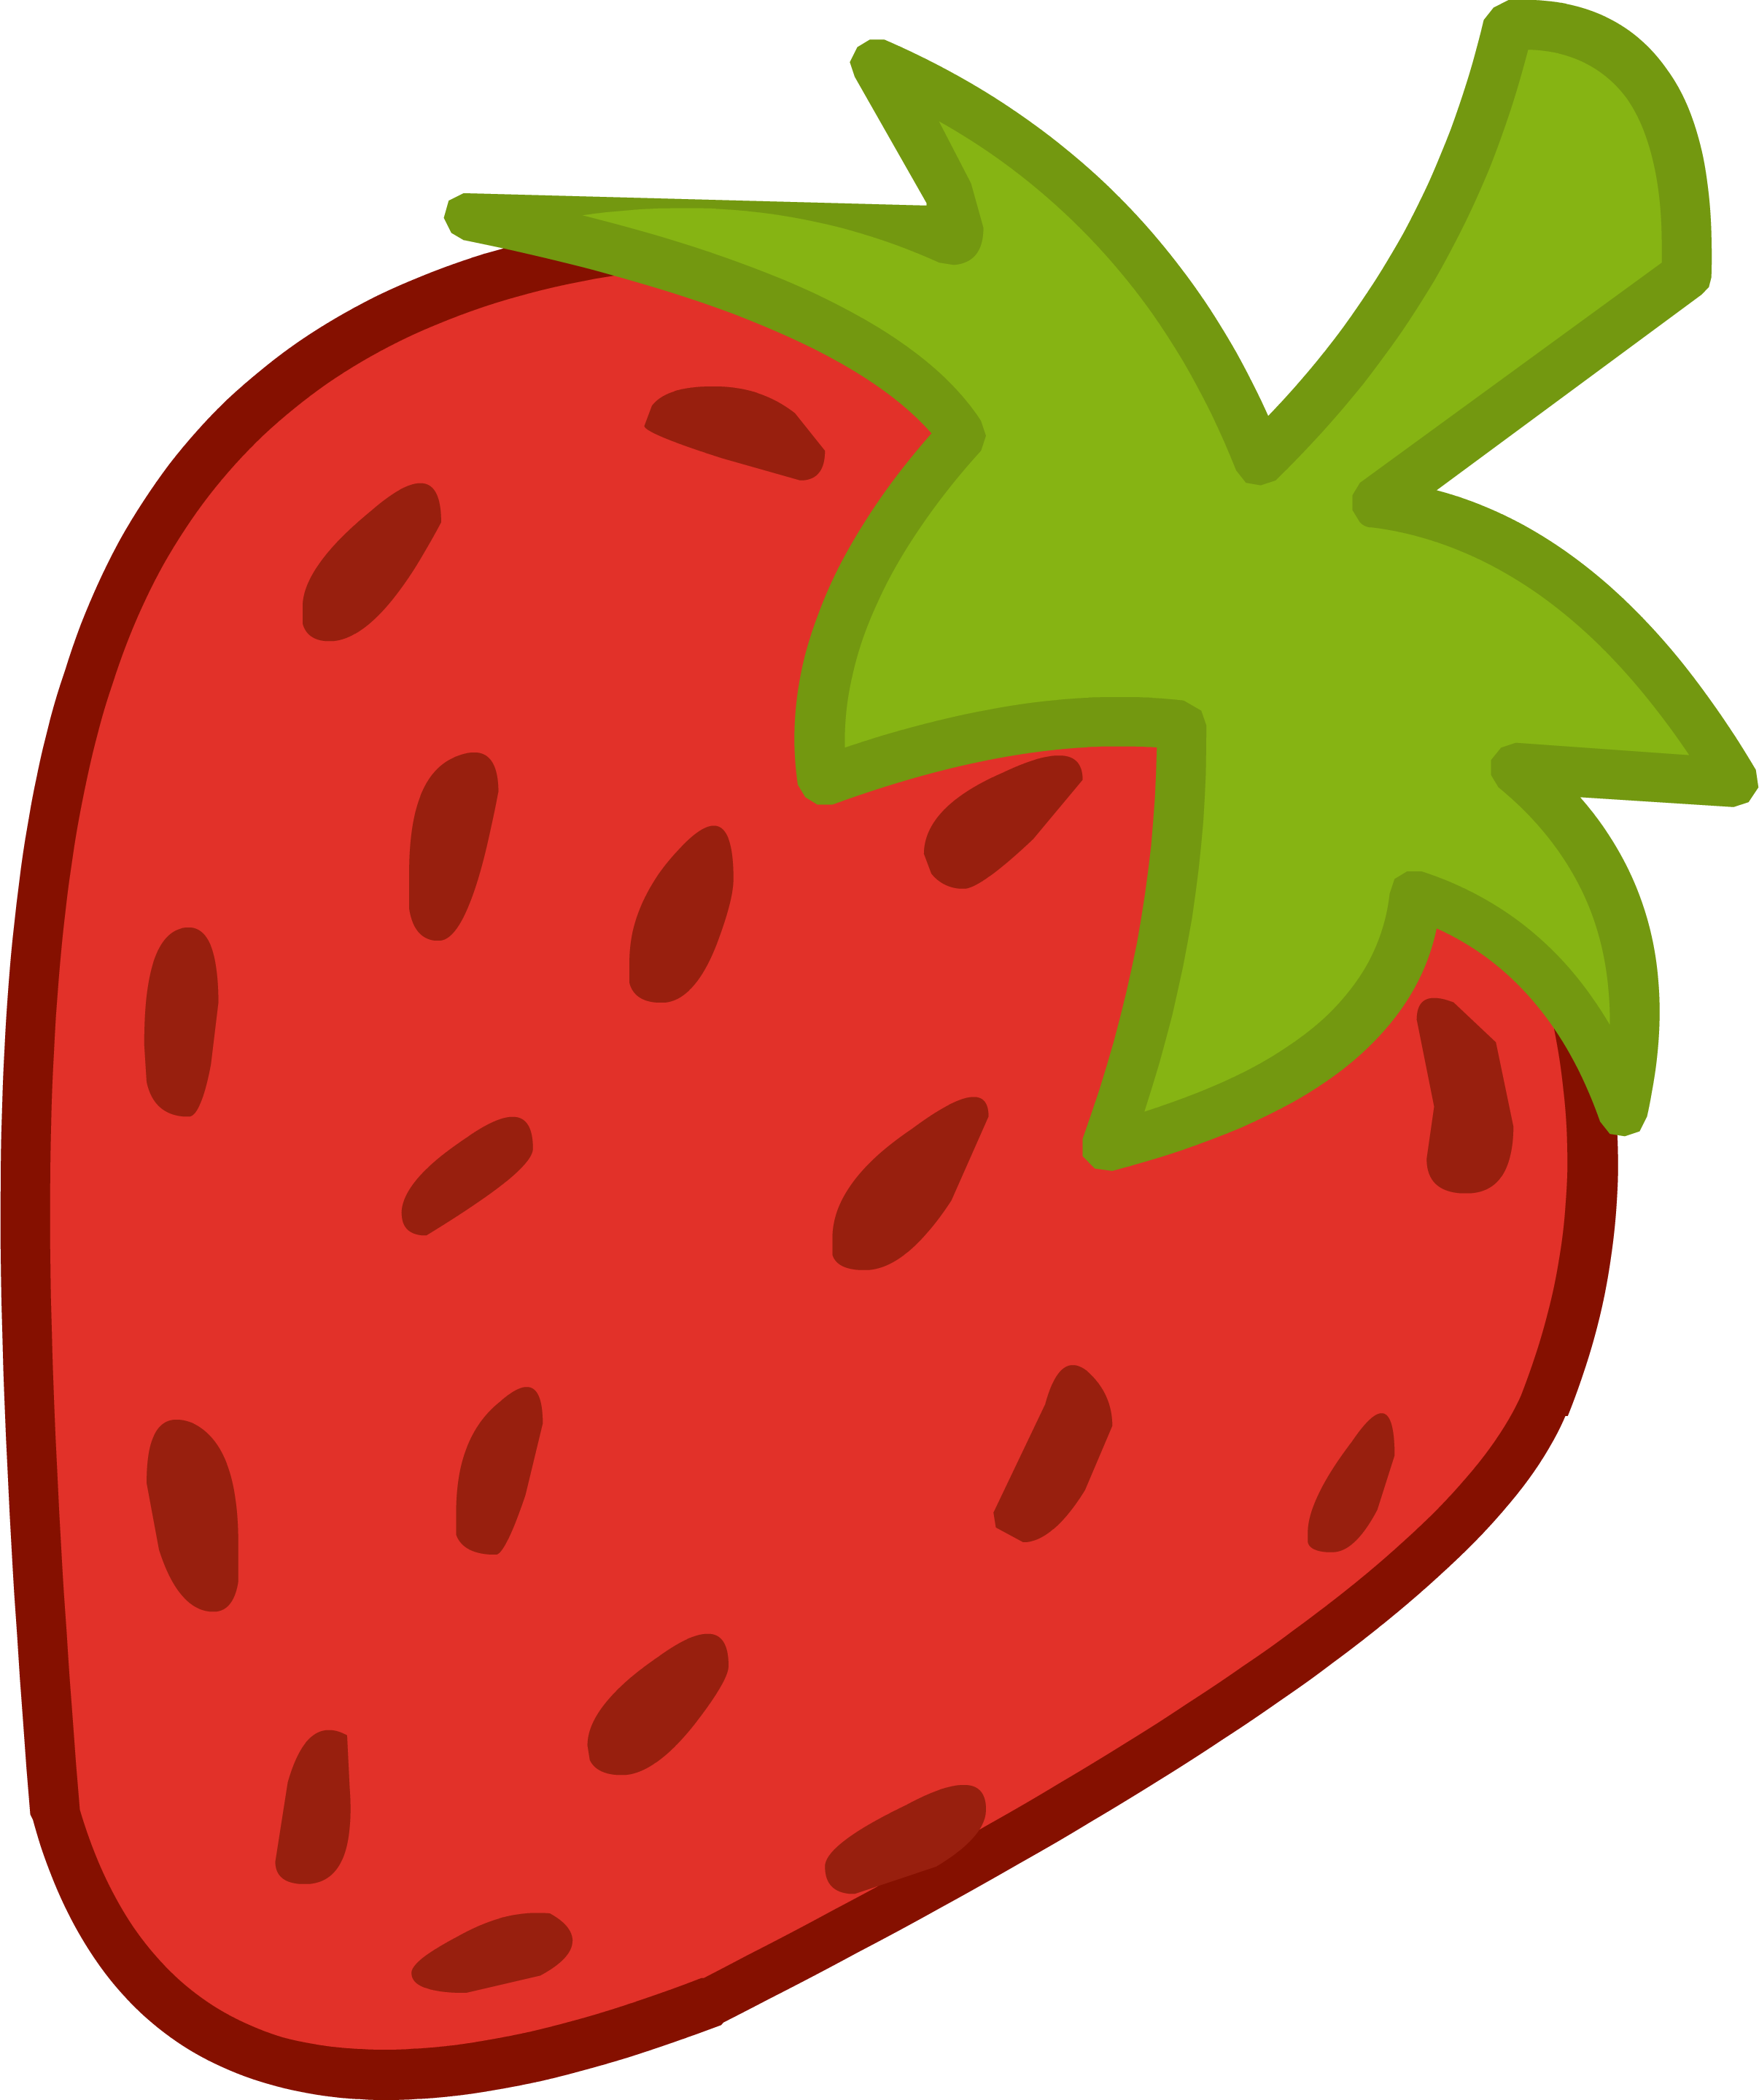 clipart of a strawberry - photo #32